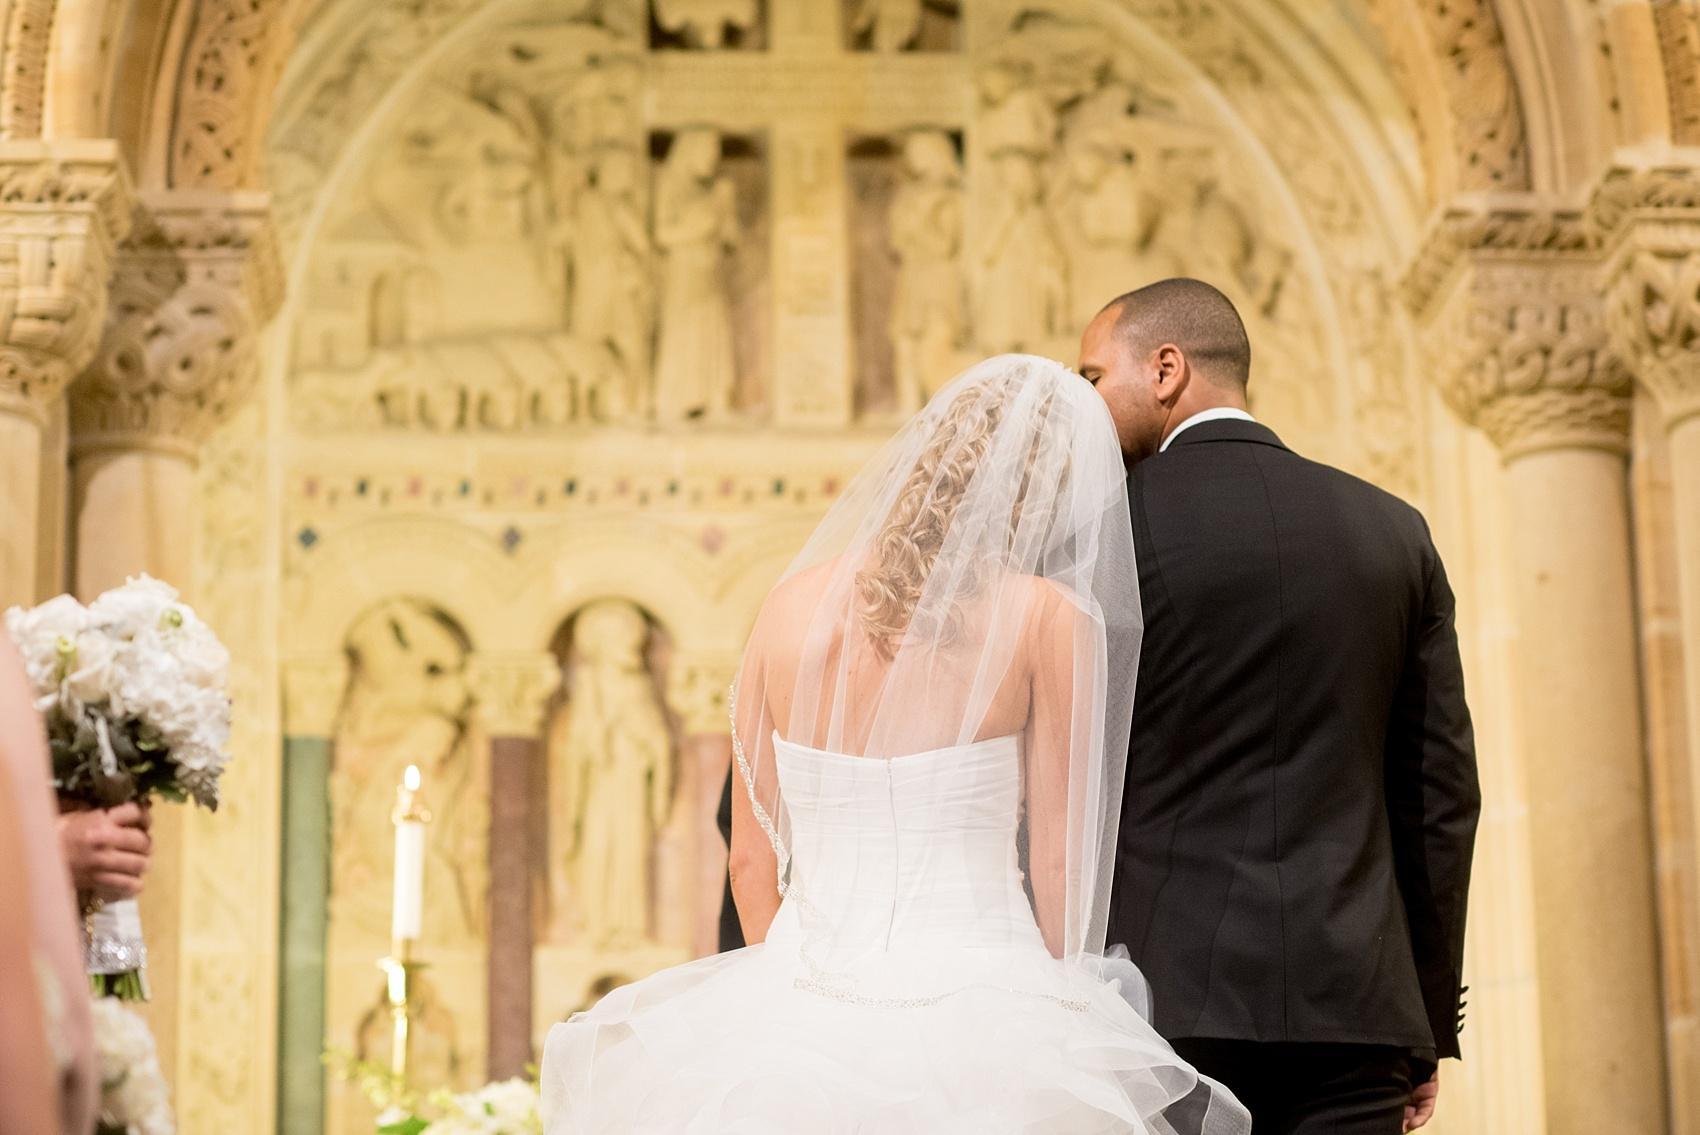 Wedding ceremony at Riverside Church in New York City. Image by Mikkel Paige Photography.